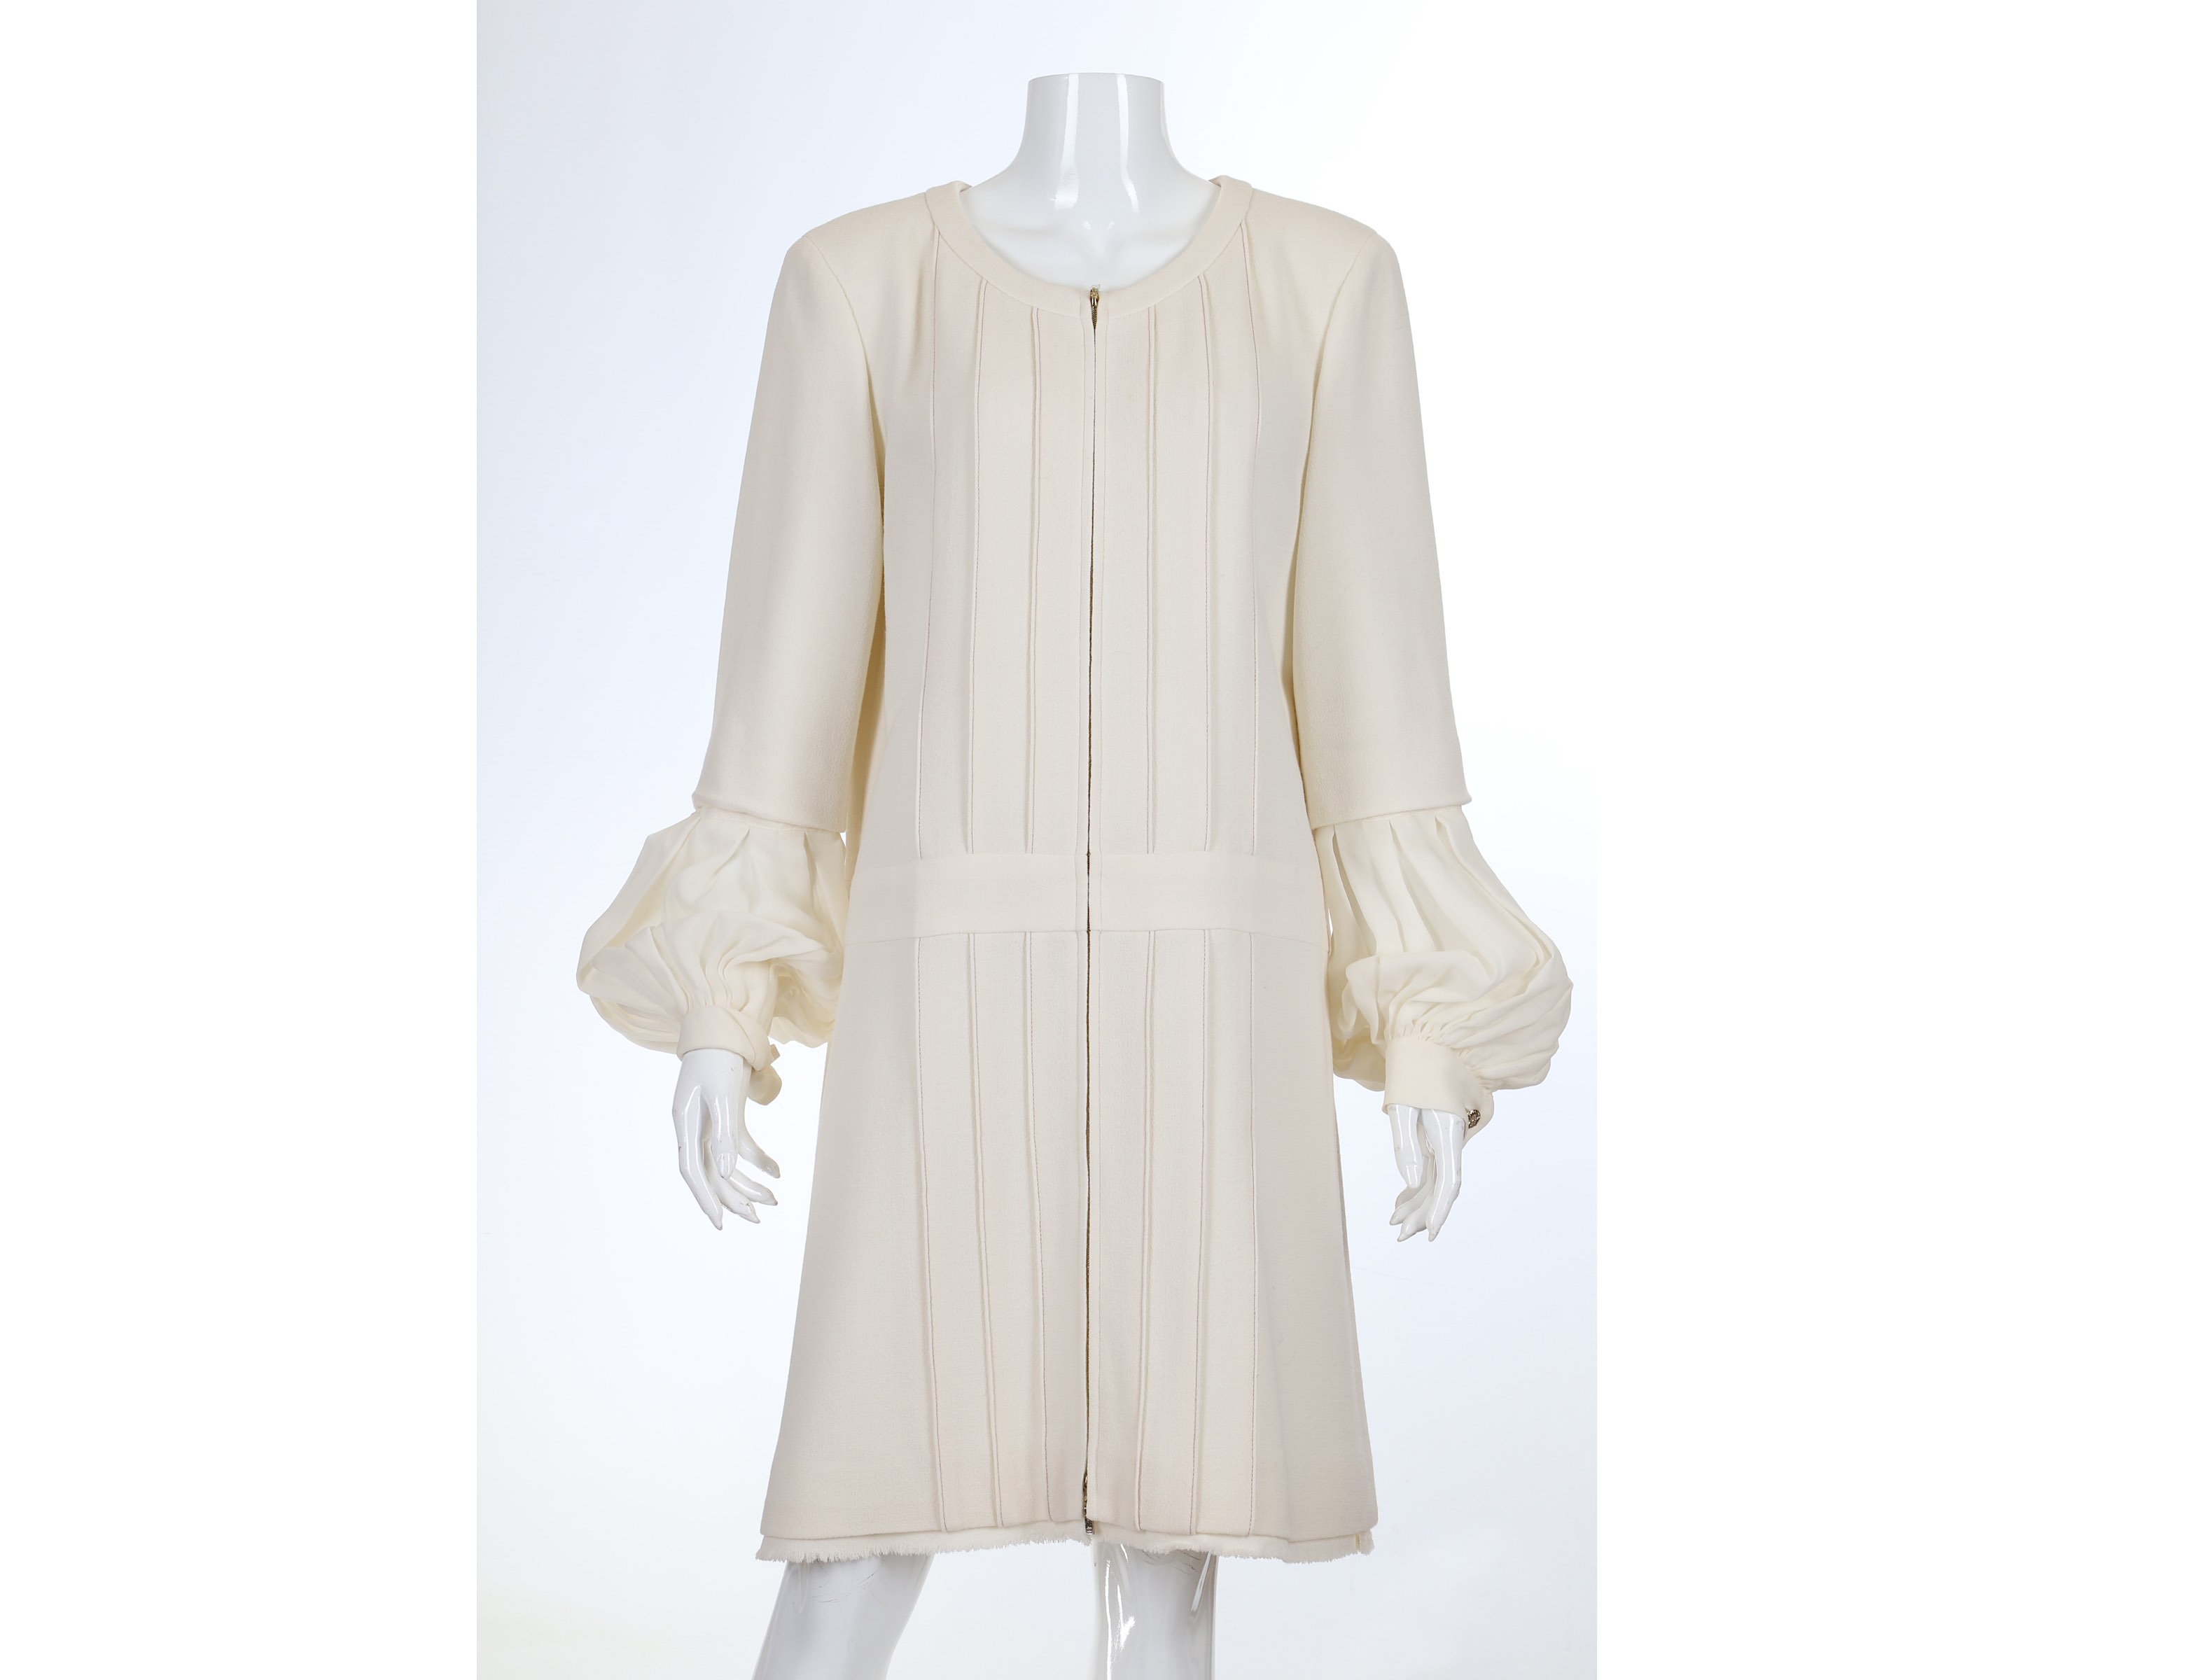 Chanel Cream Pleated Dress Coat, 2010s, with zip down front and removable silk sleeve details, - Image 2 of 5